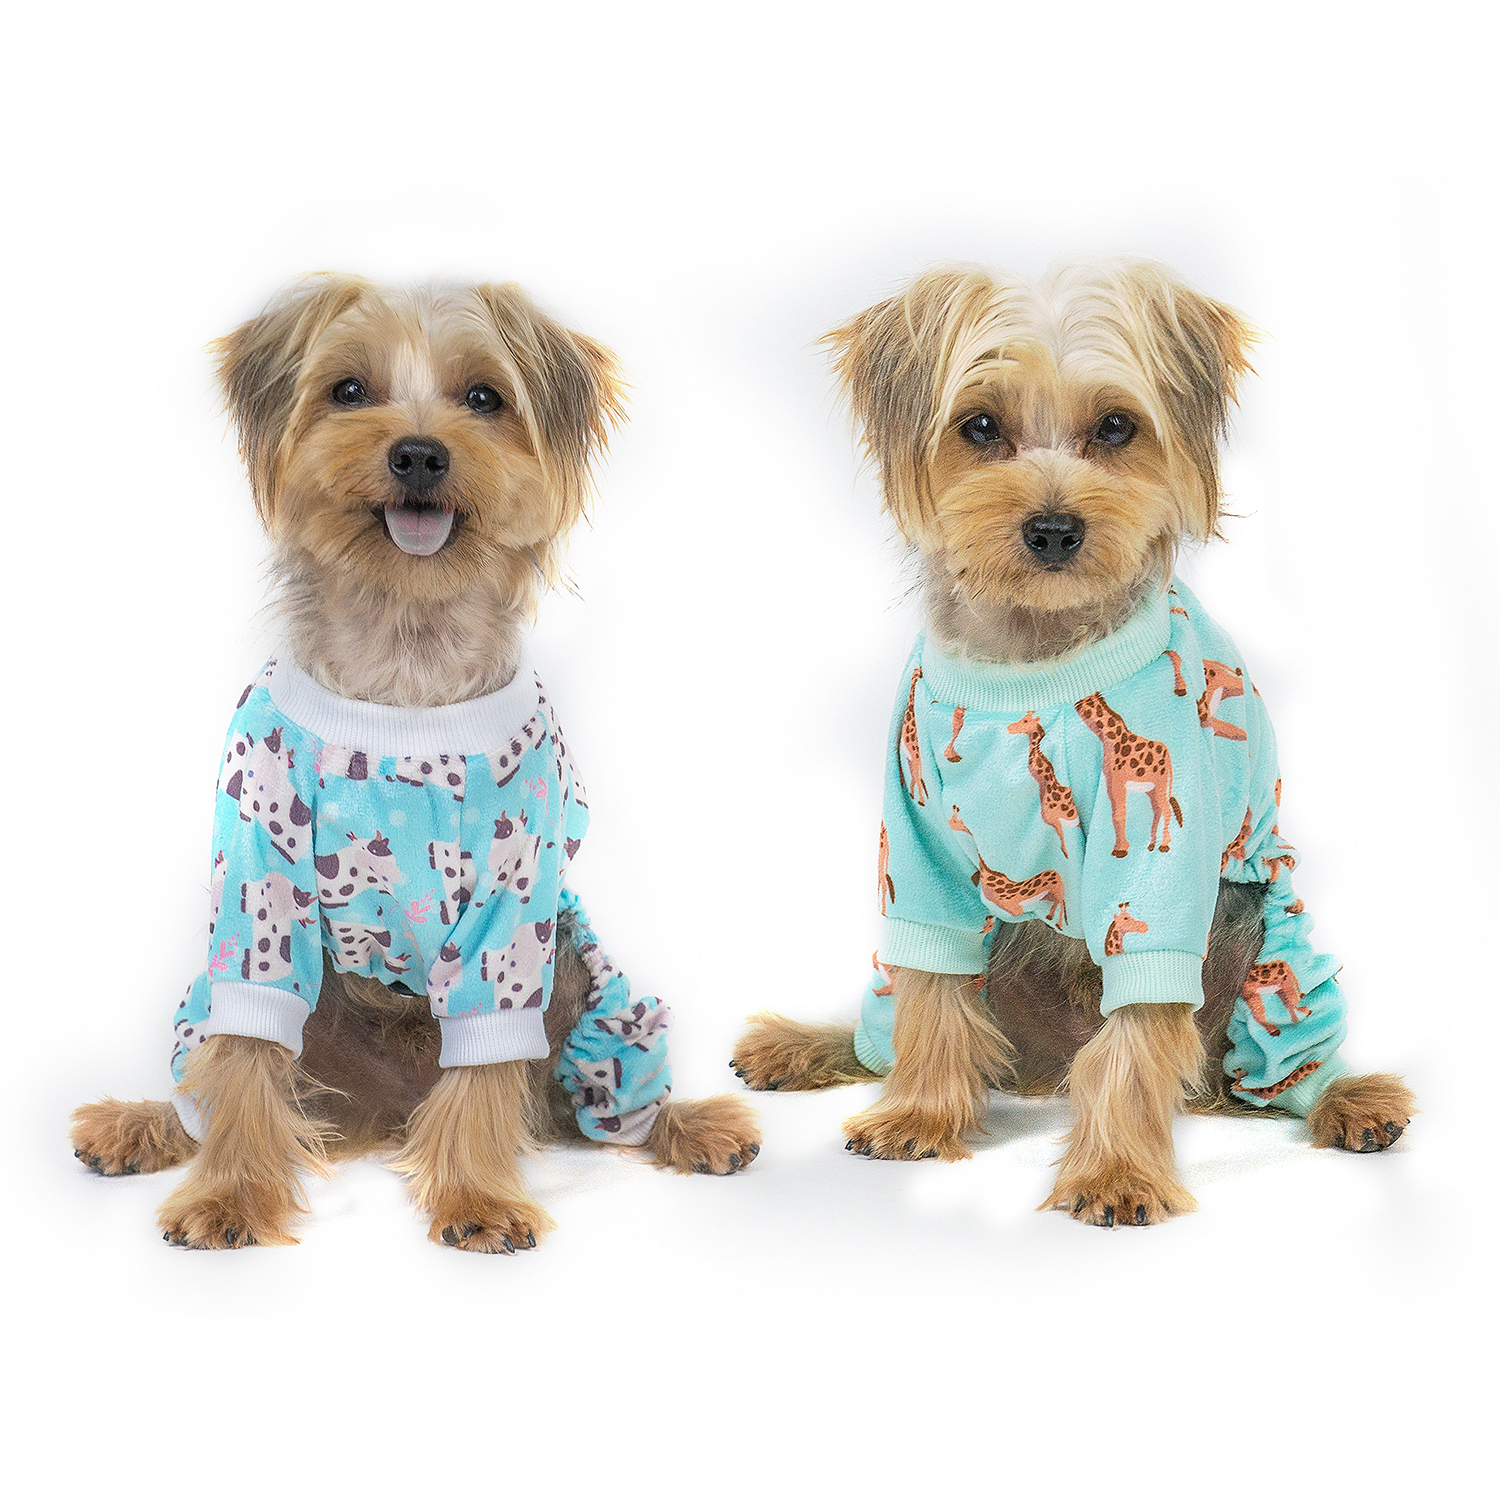 CuteBone Halloween Dog Pajamas Costumes Pet Clothes Cat Apparel Shirt Winter Holiday Cute Pjs Outfits for Doggie Onesies